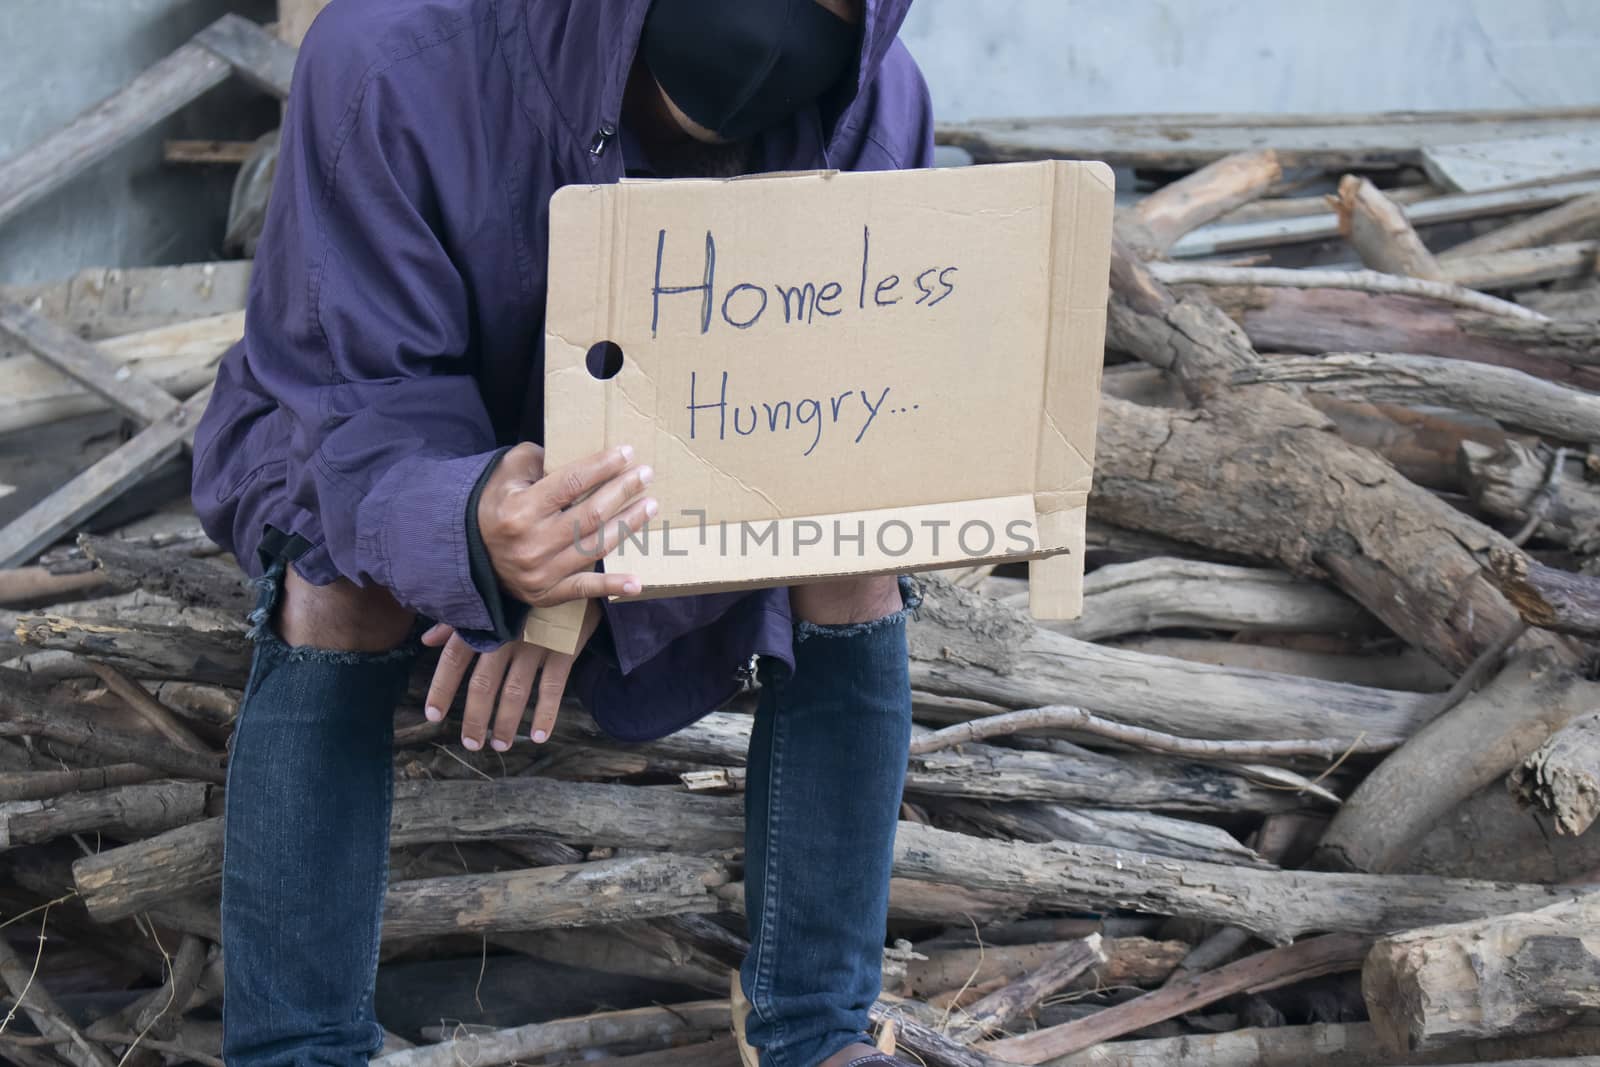 Close-up of homeless and hungry street person asking for help 